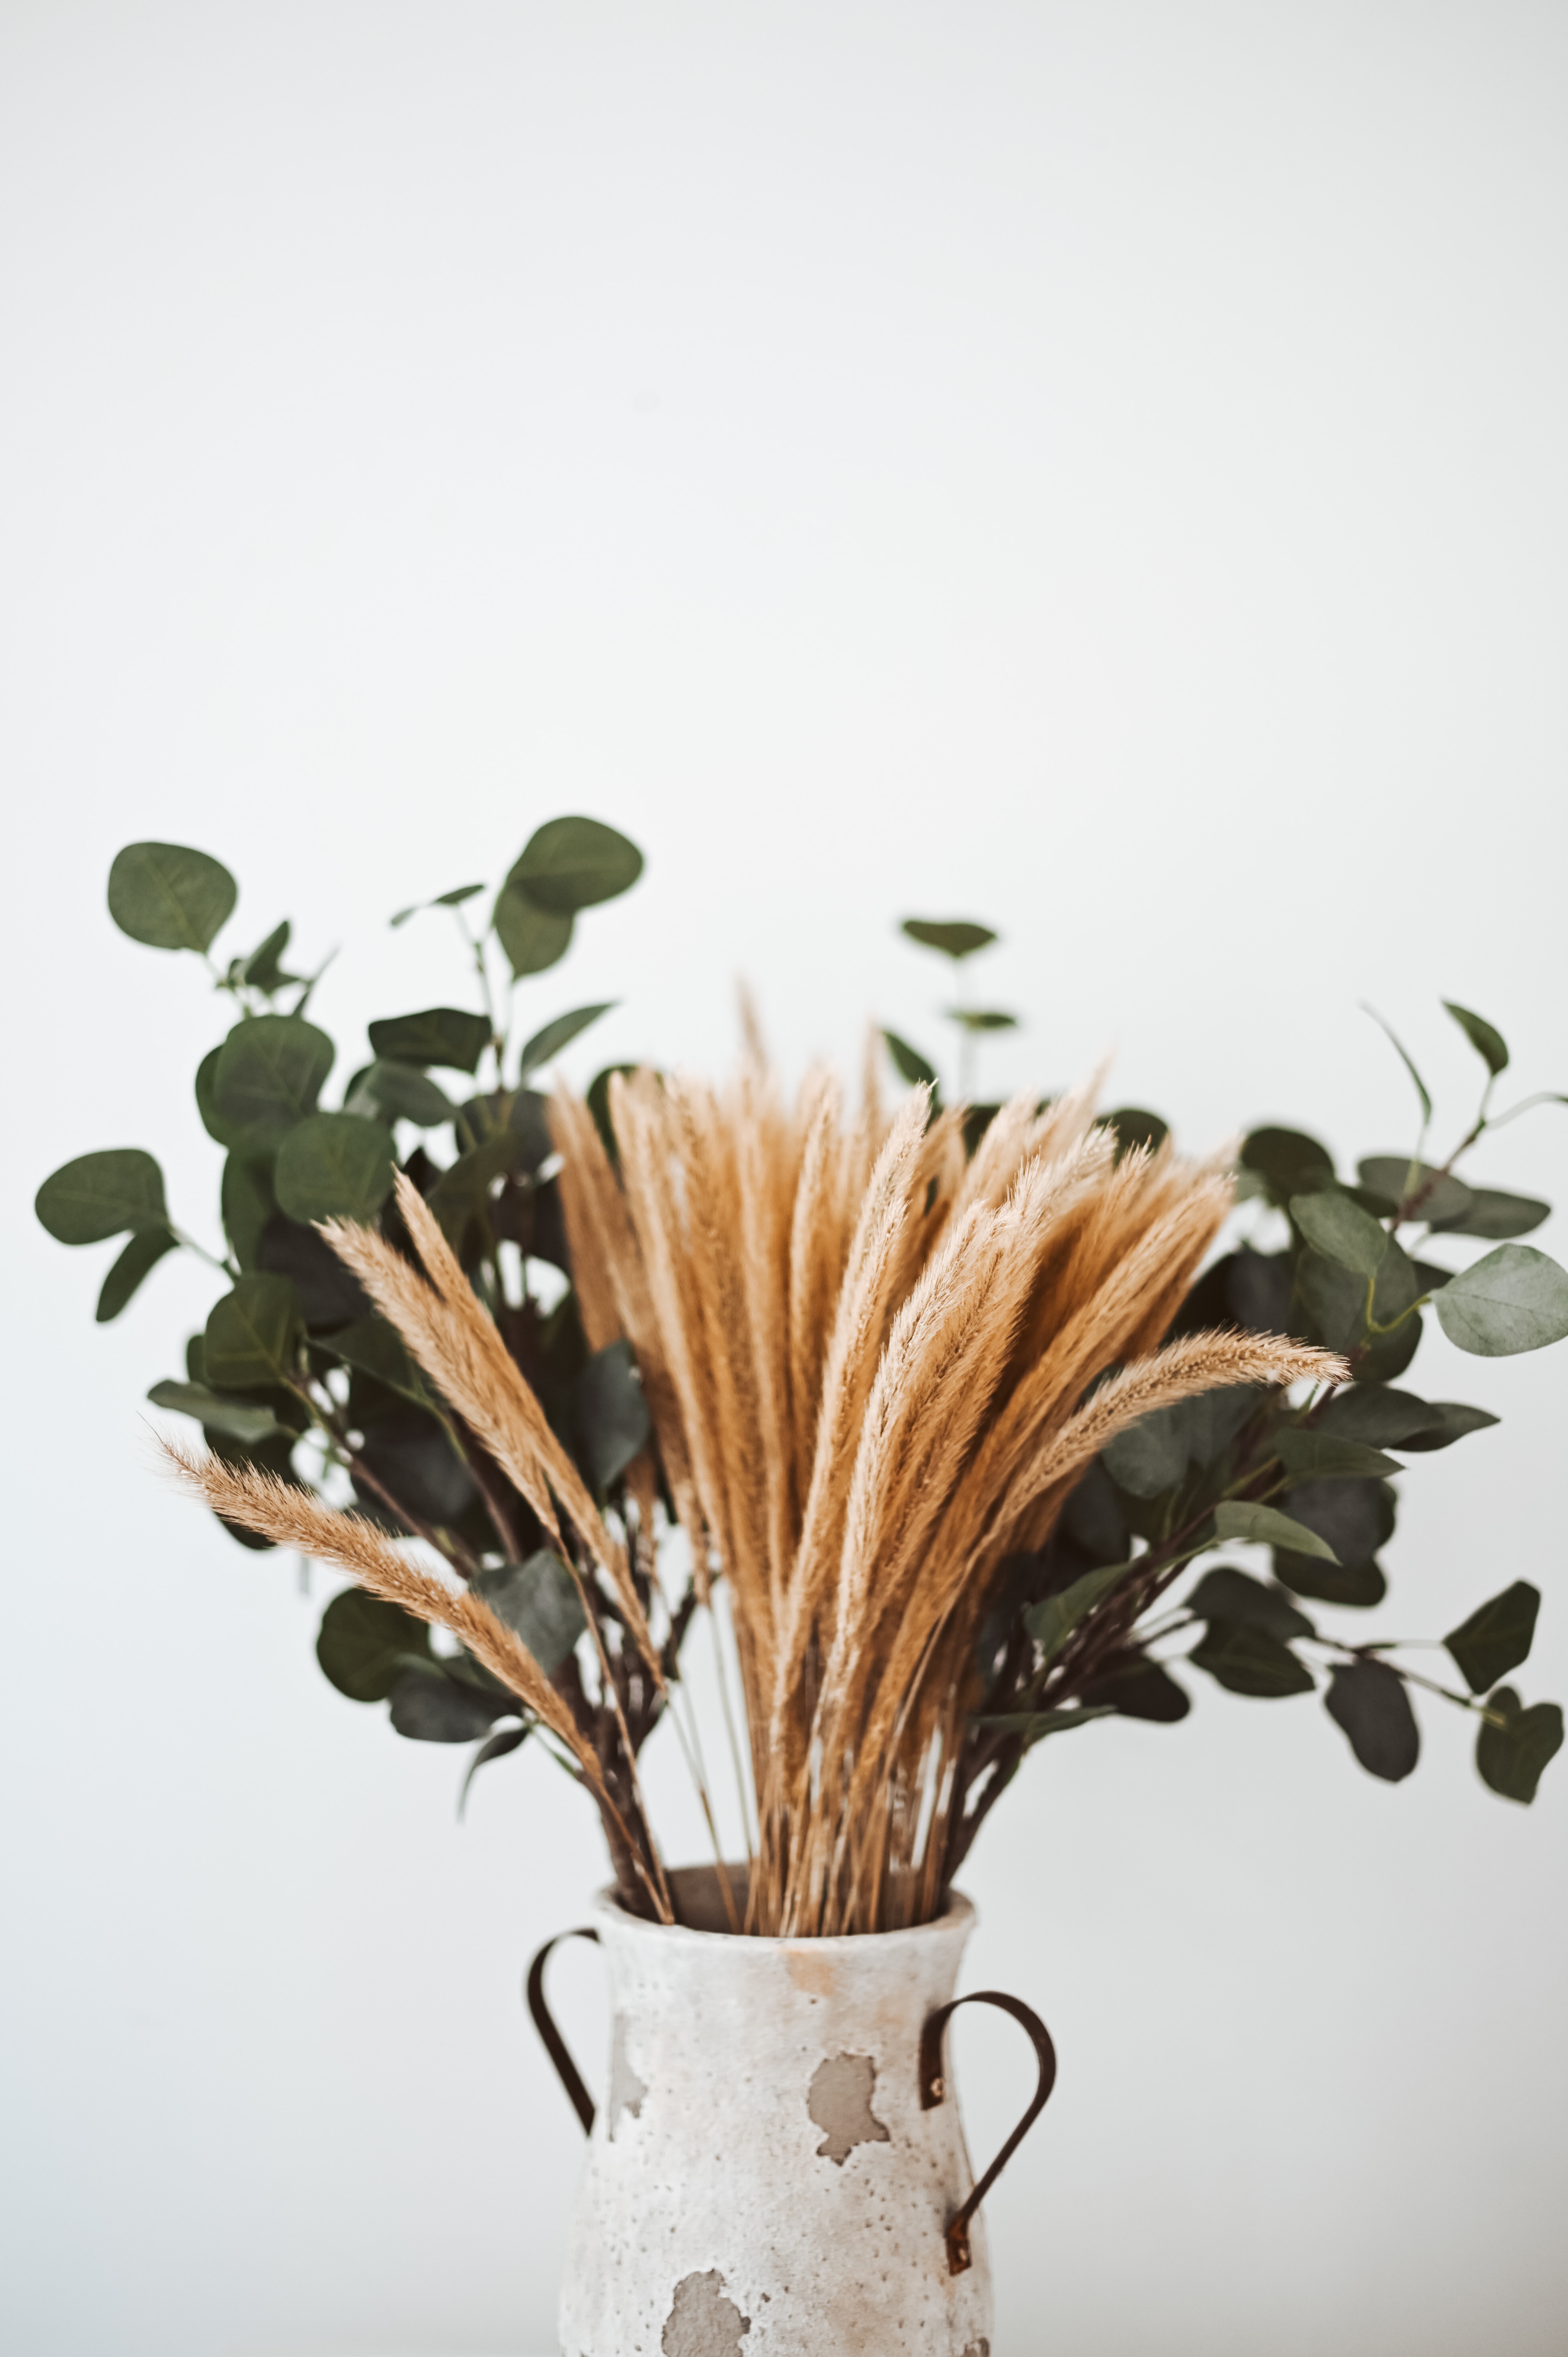 Free HD bouquet, flowers, cones, branches, vase, spikelets, composition